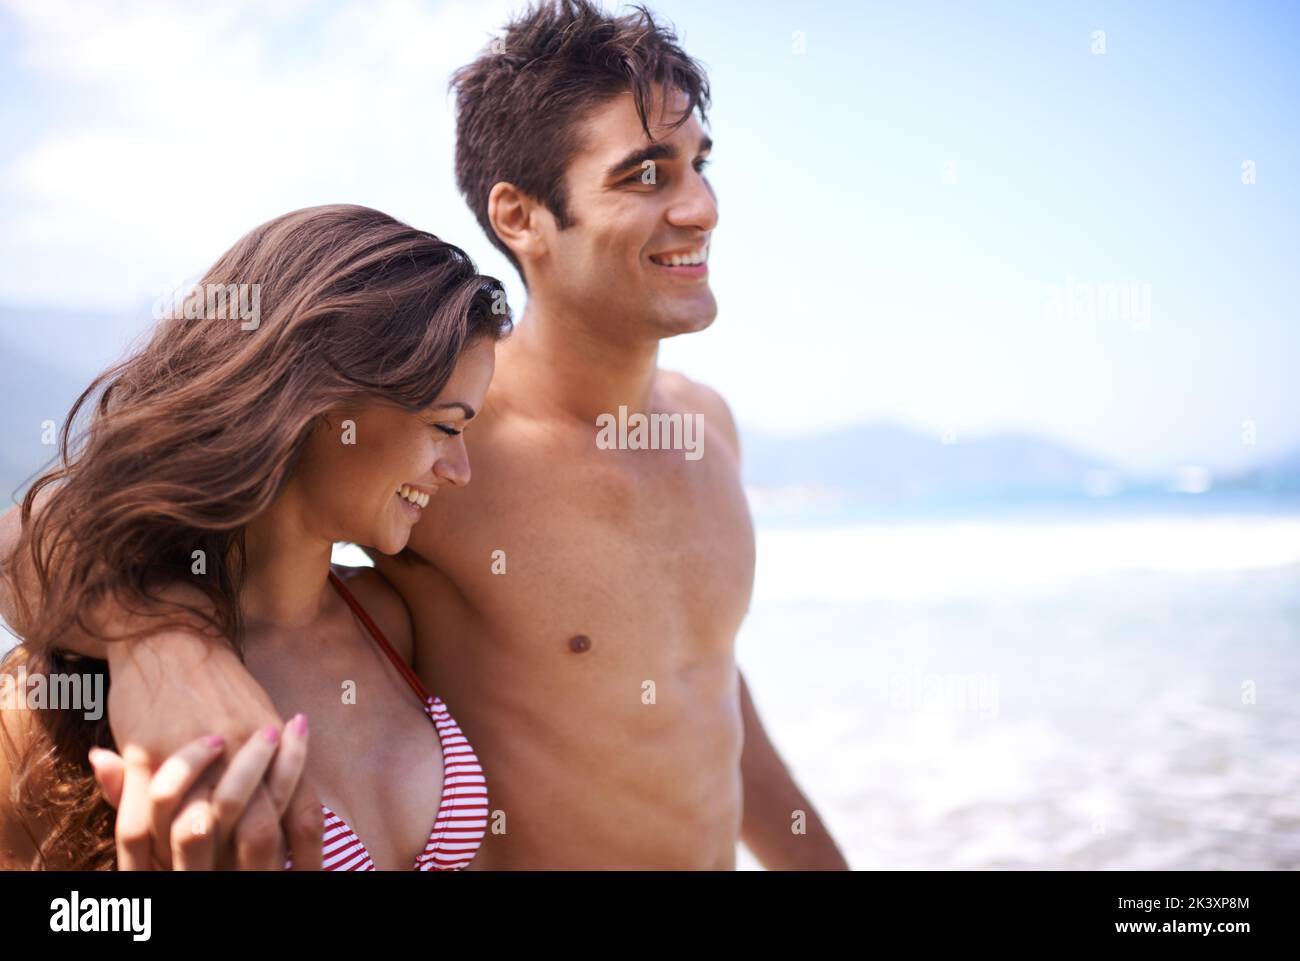 Its romance in paradise. a young couple enjoying a beach getaway. Stock Photo